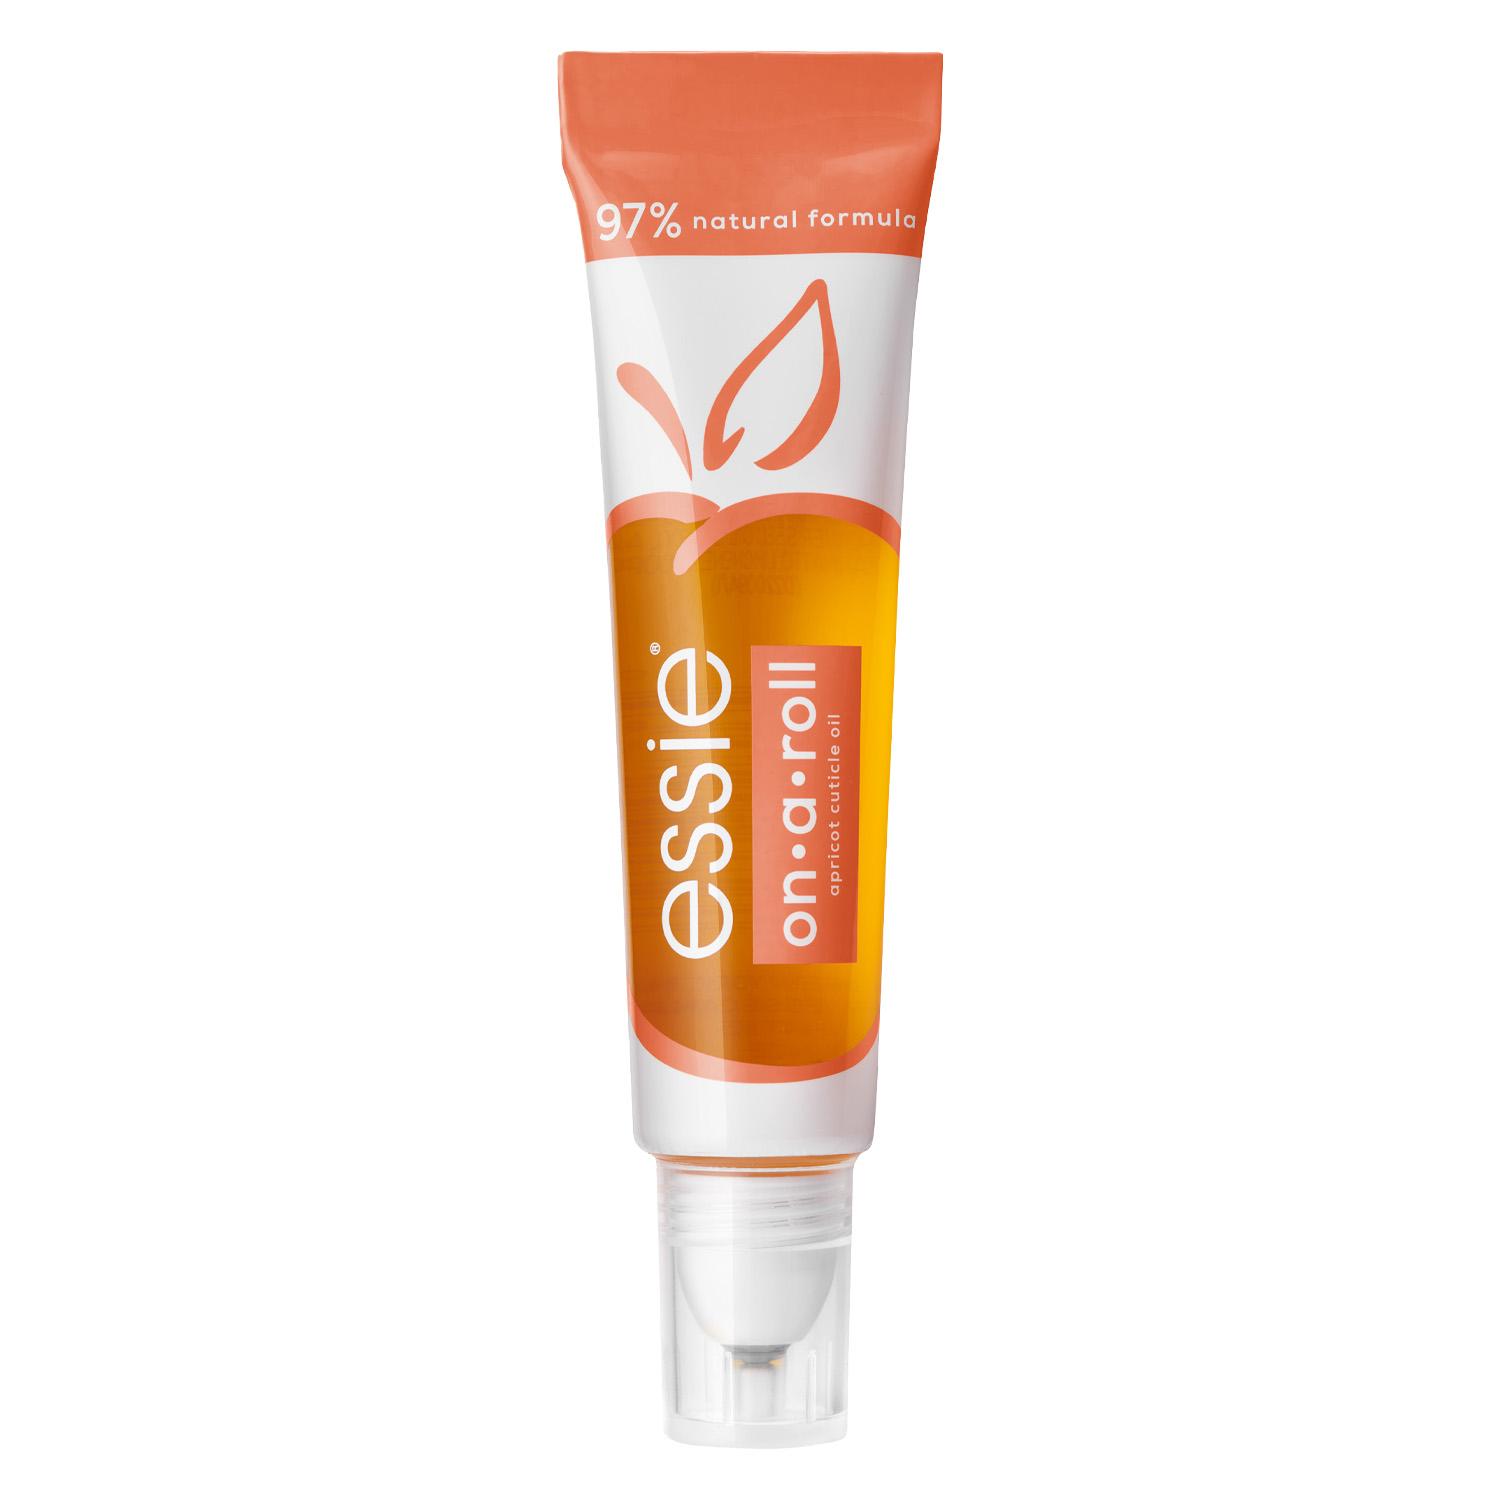 essie care - on a roll apricot nail & cuticle oil